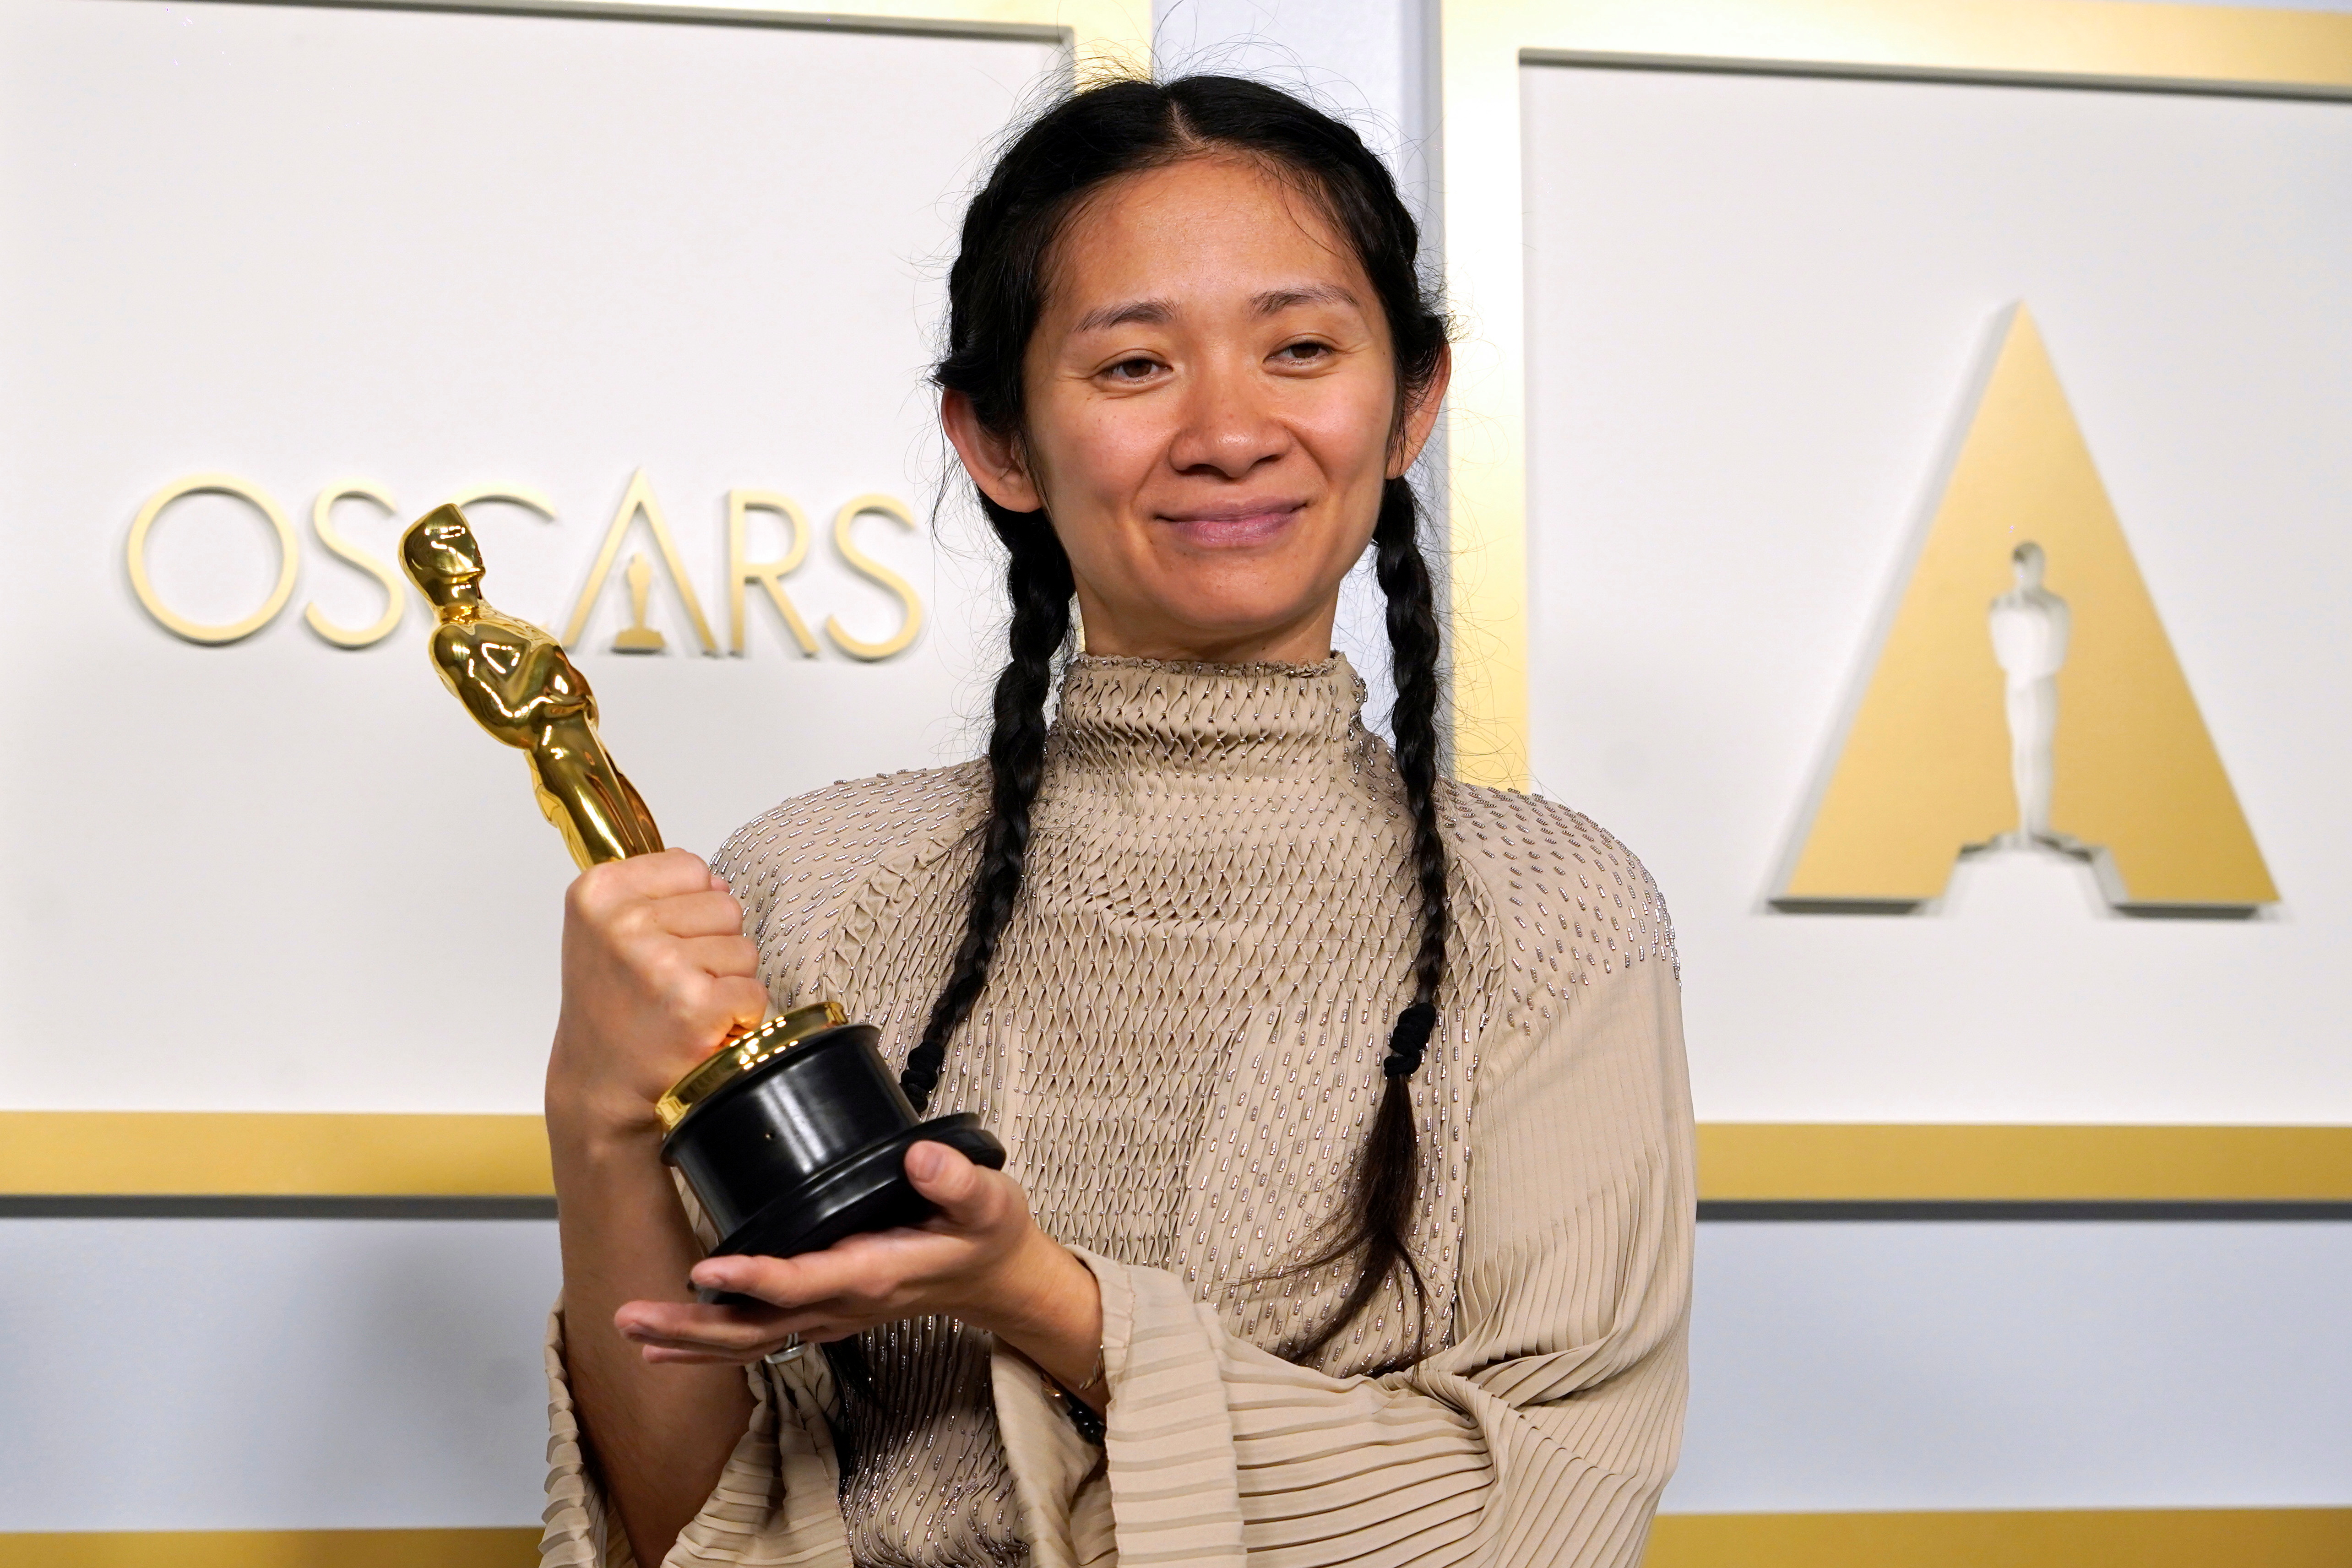 News18 - Chloé Zhao won the Oscar for best director for